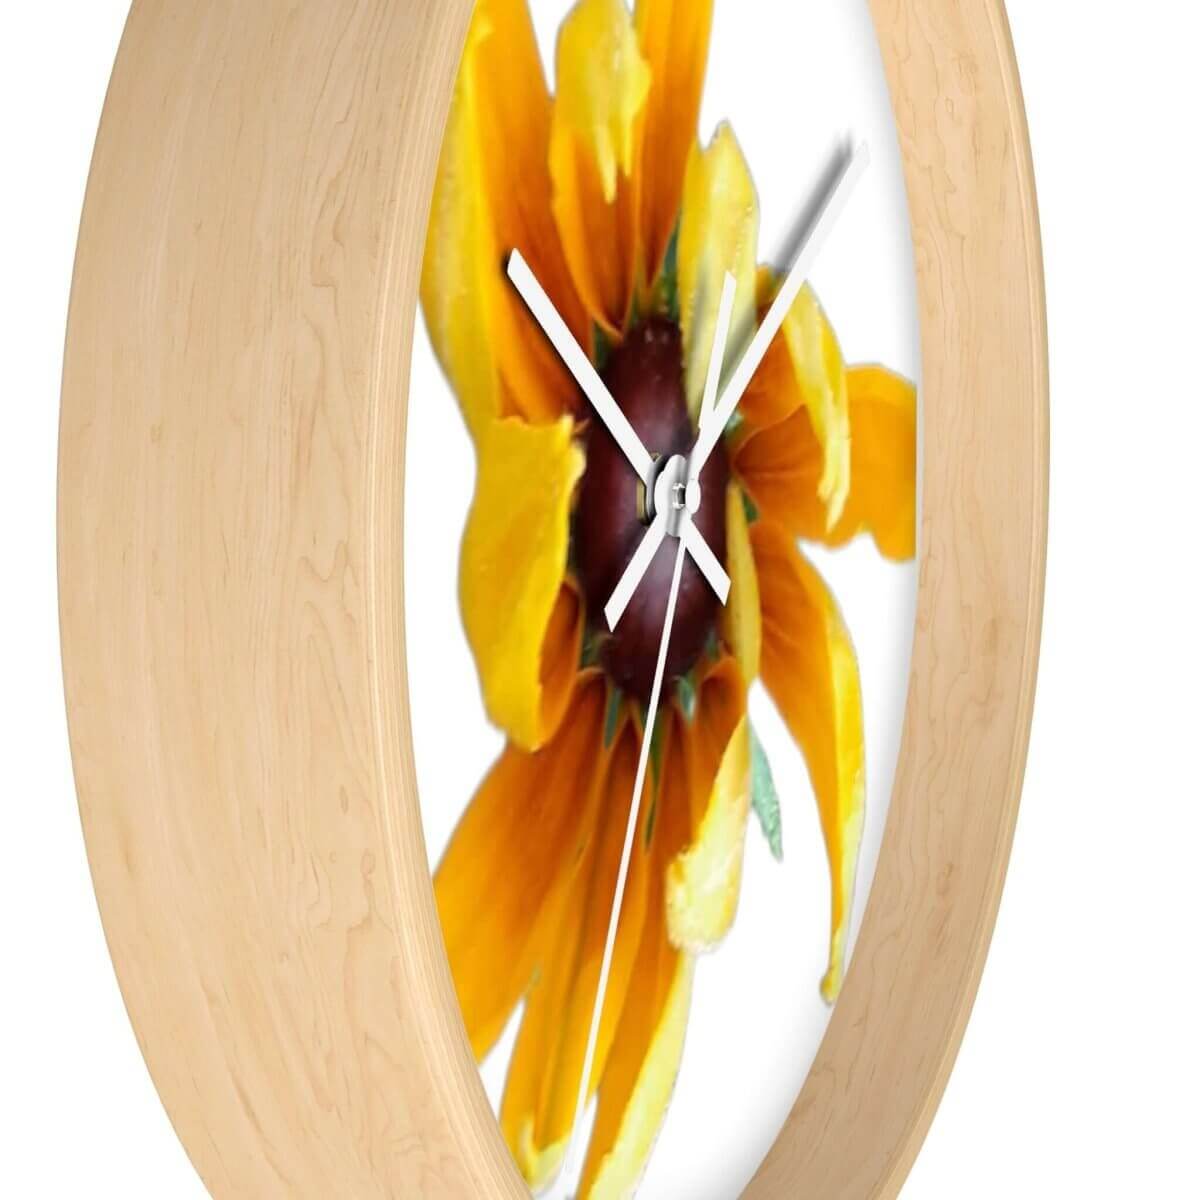 Yellow Kitchen Wall Clock - Hearth Home & Living